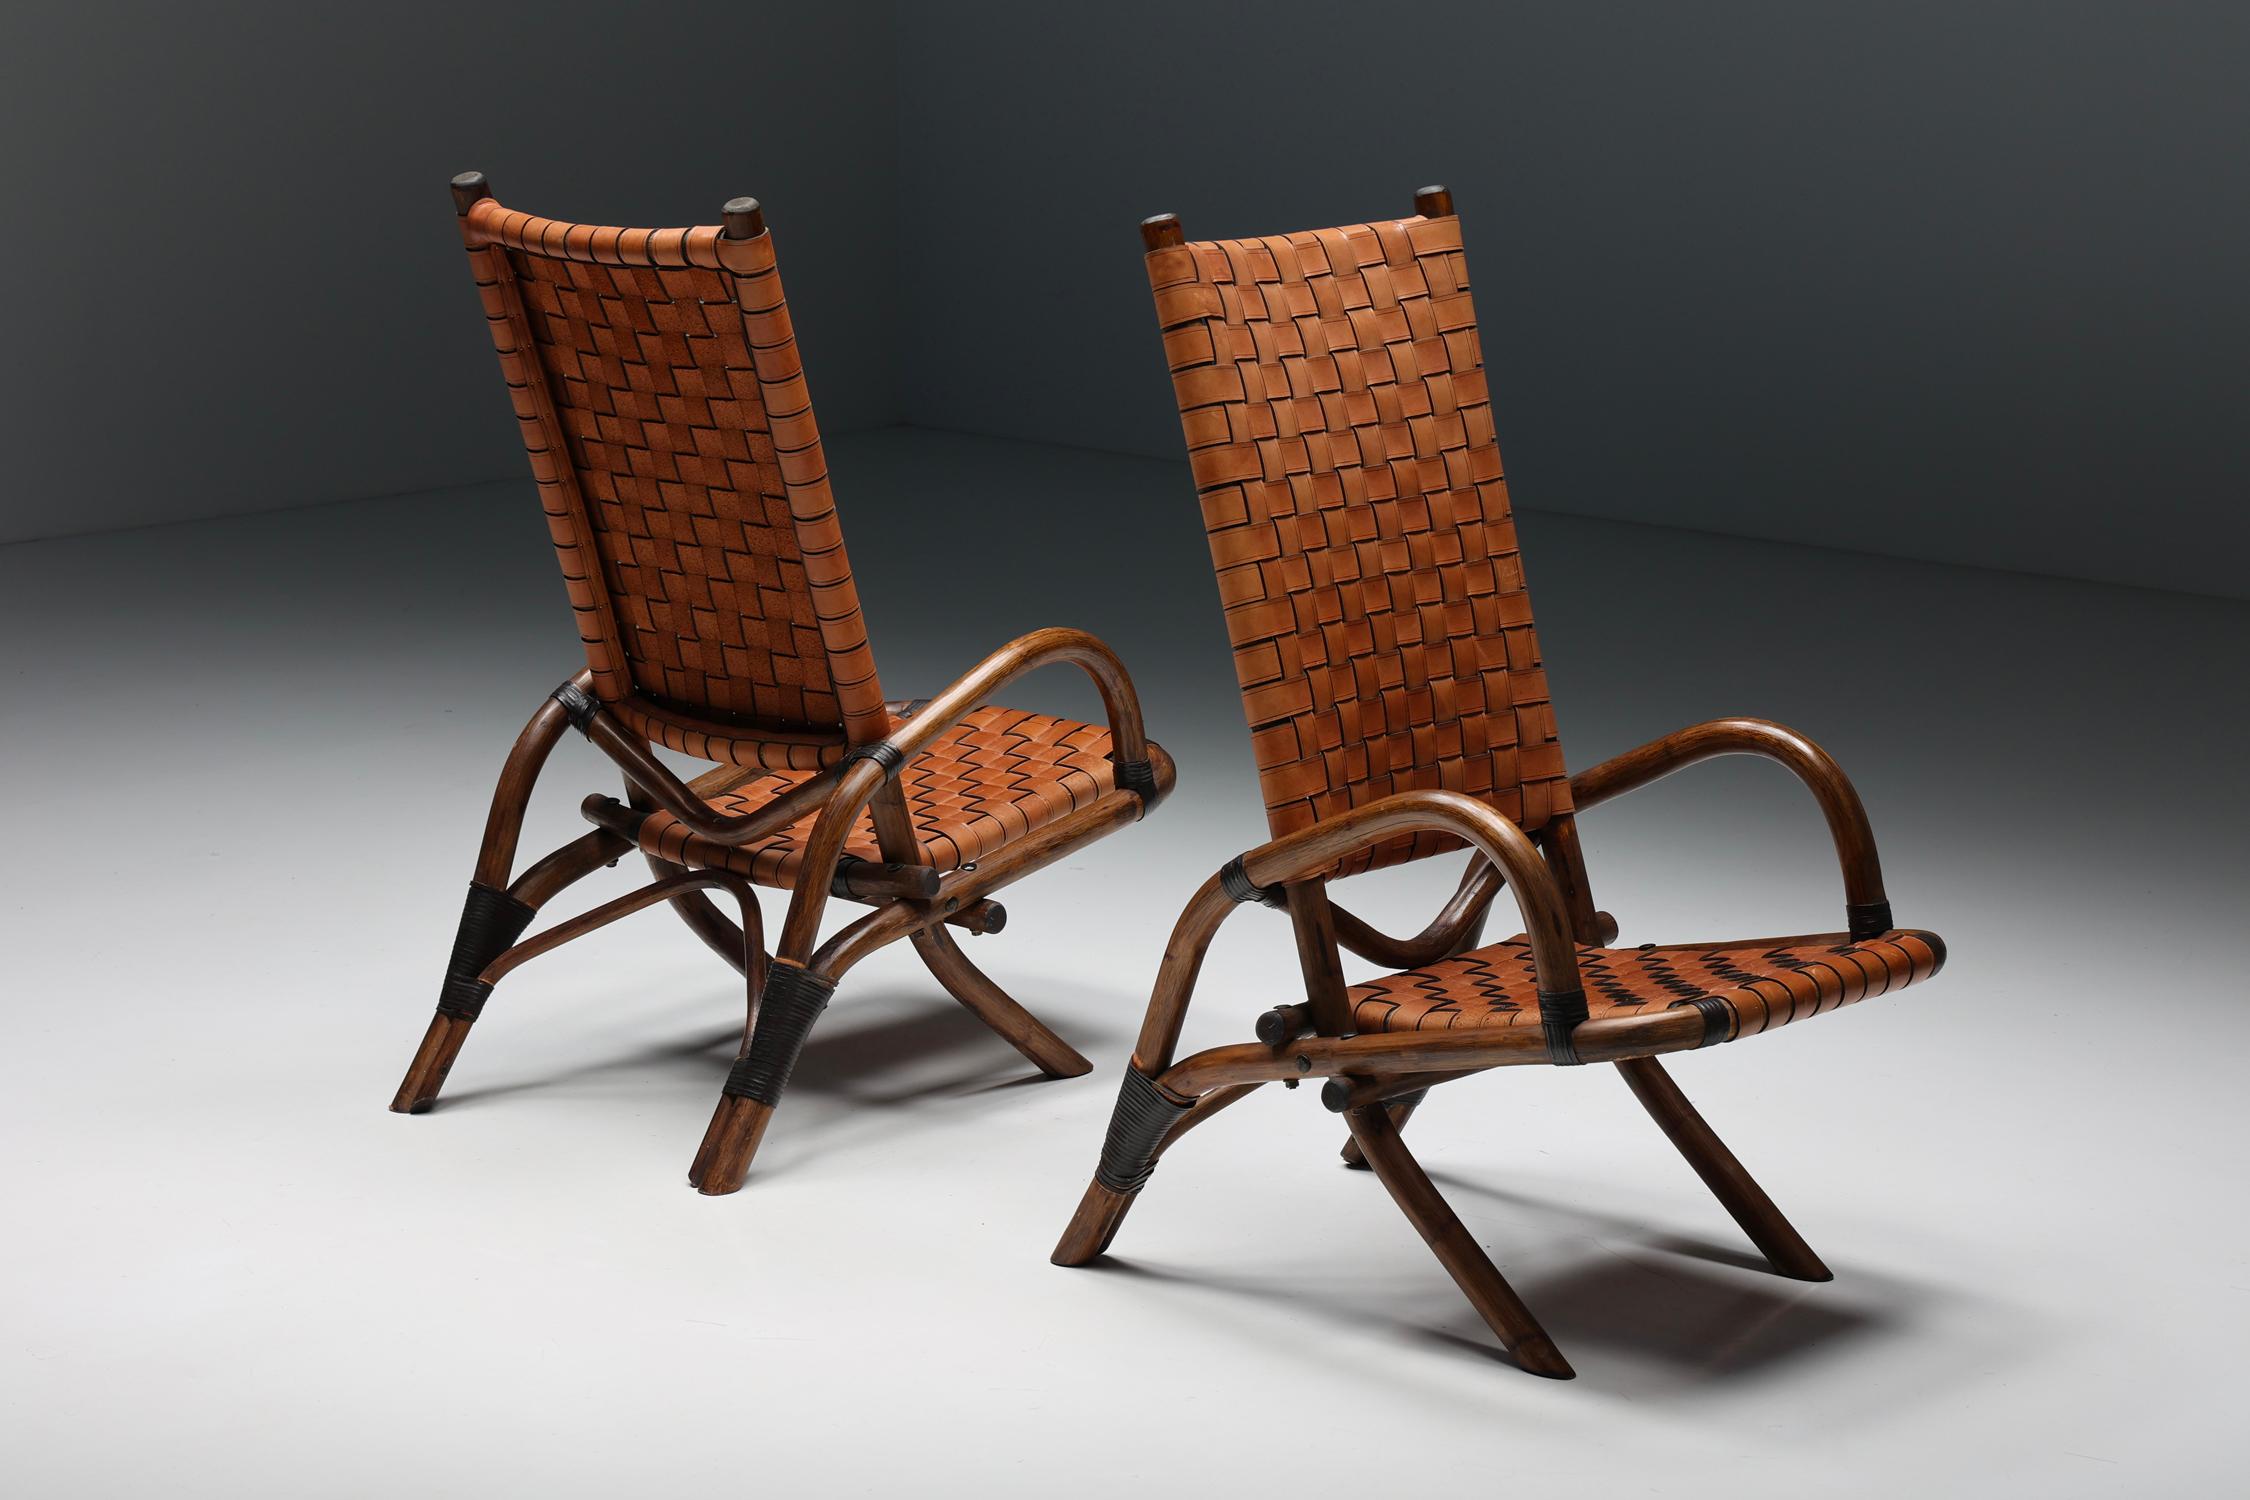 Armchairs; woven leather; bamboo; folding chairs; Mid-Century Modern; rustic; France; 1950s; 

Mid-Century Modern folding chairs with a tilted backrest and curved armrests. These armchairs are made of a bamboo frame with seating and backrest in